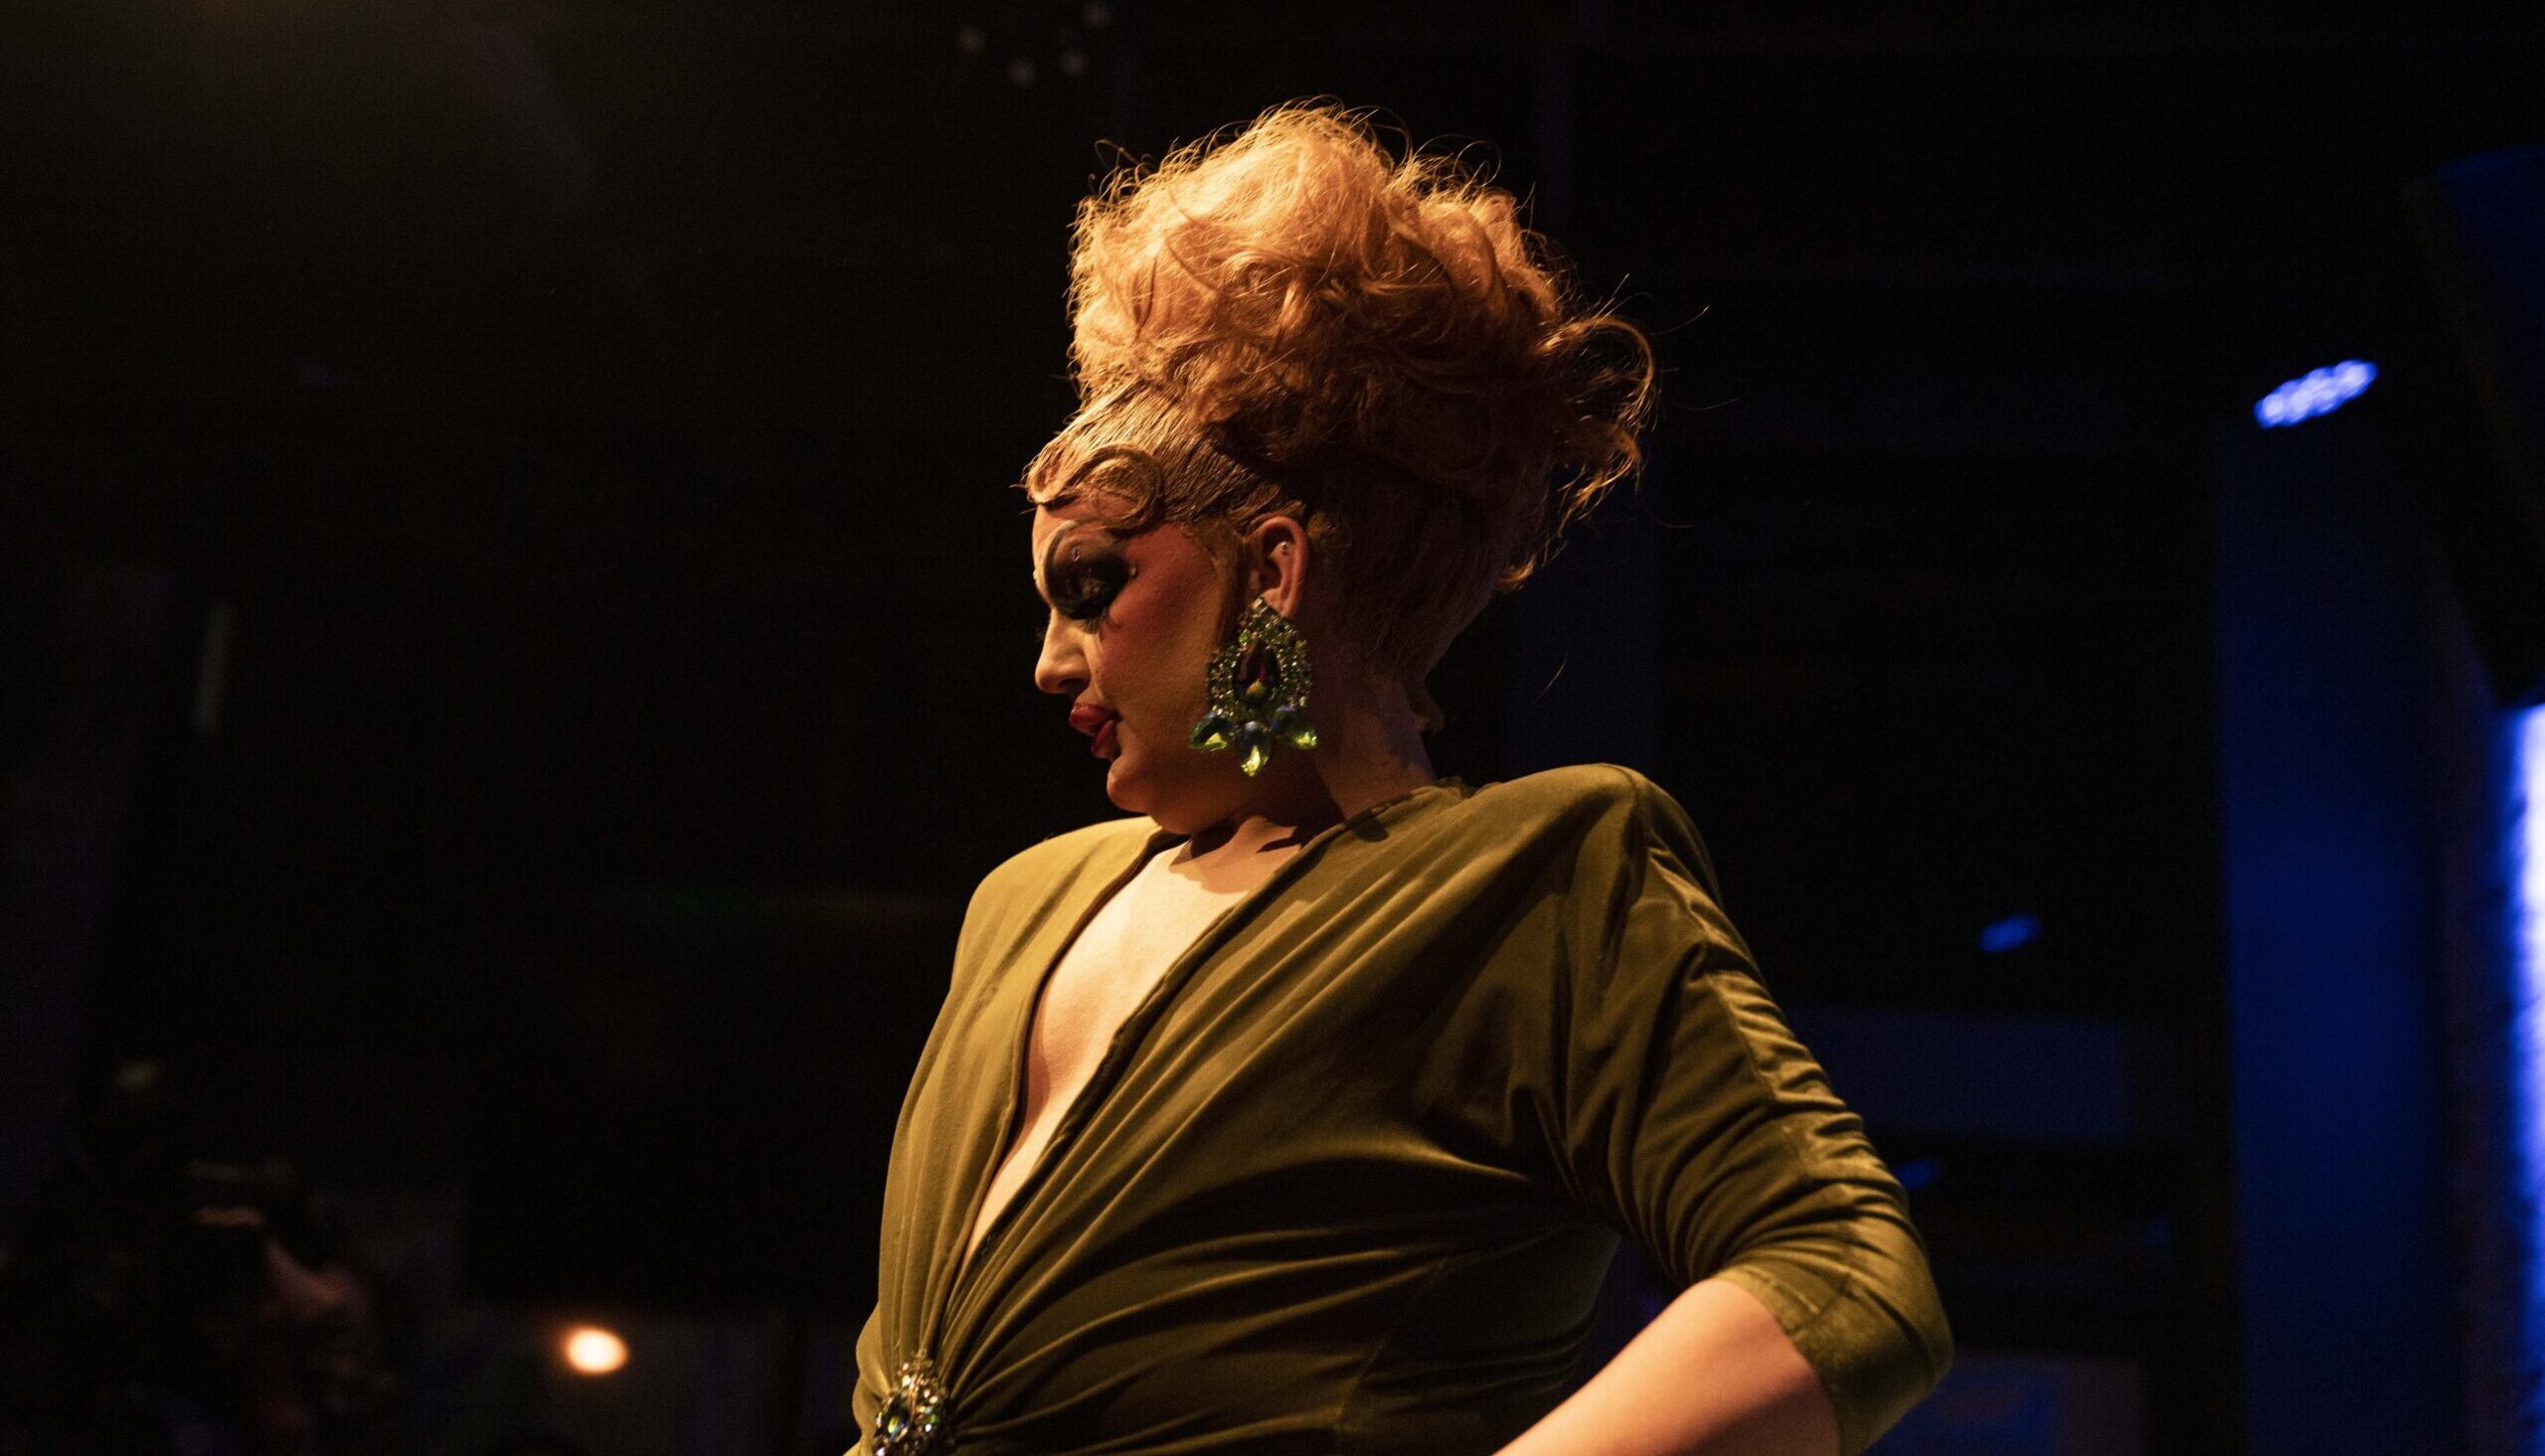 Drag queen Vanity is under a spotlight in the foreground, while most of the background is black. Her red hair is teased high in an up-do, with the front smoothed back. She's in profile, looking off to the side, and is wearing a large earring with many large gemstones. She's wearing a low cut muted green dress, with a crystal broach at the waist.